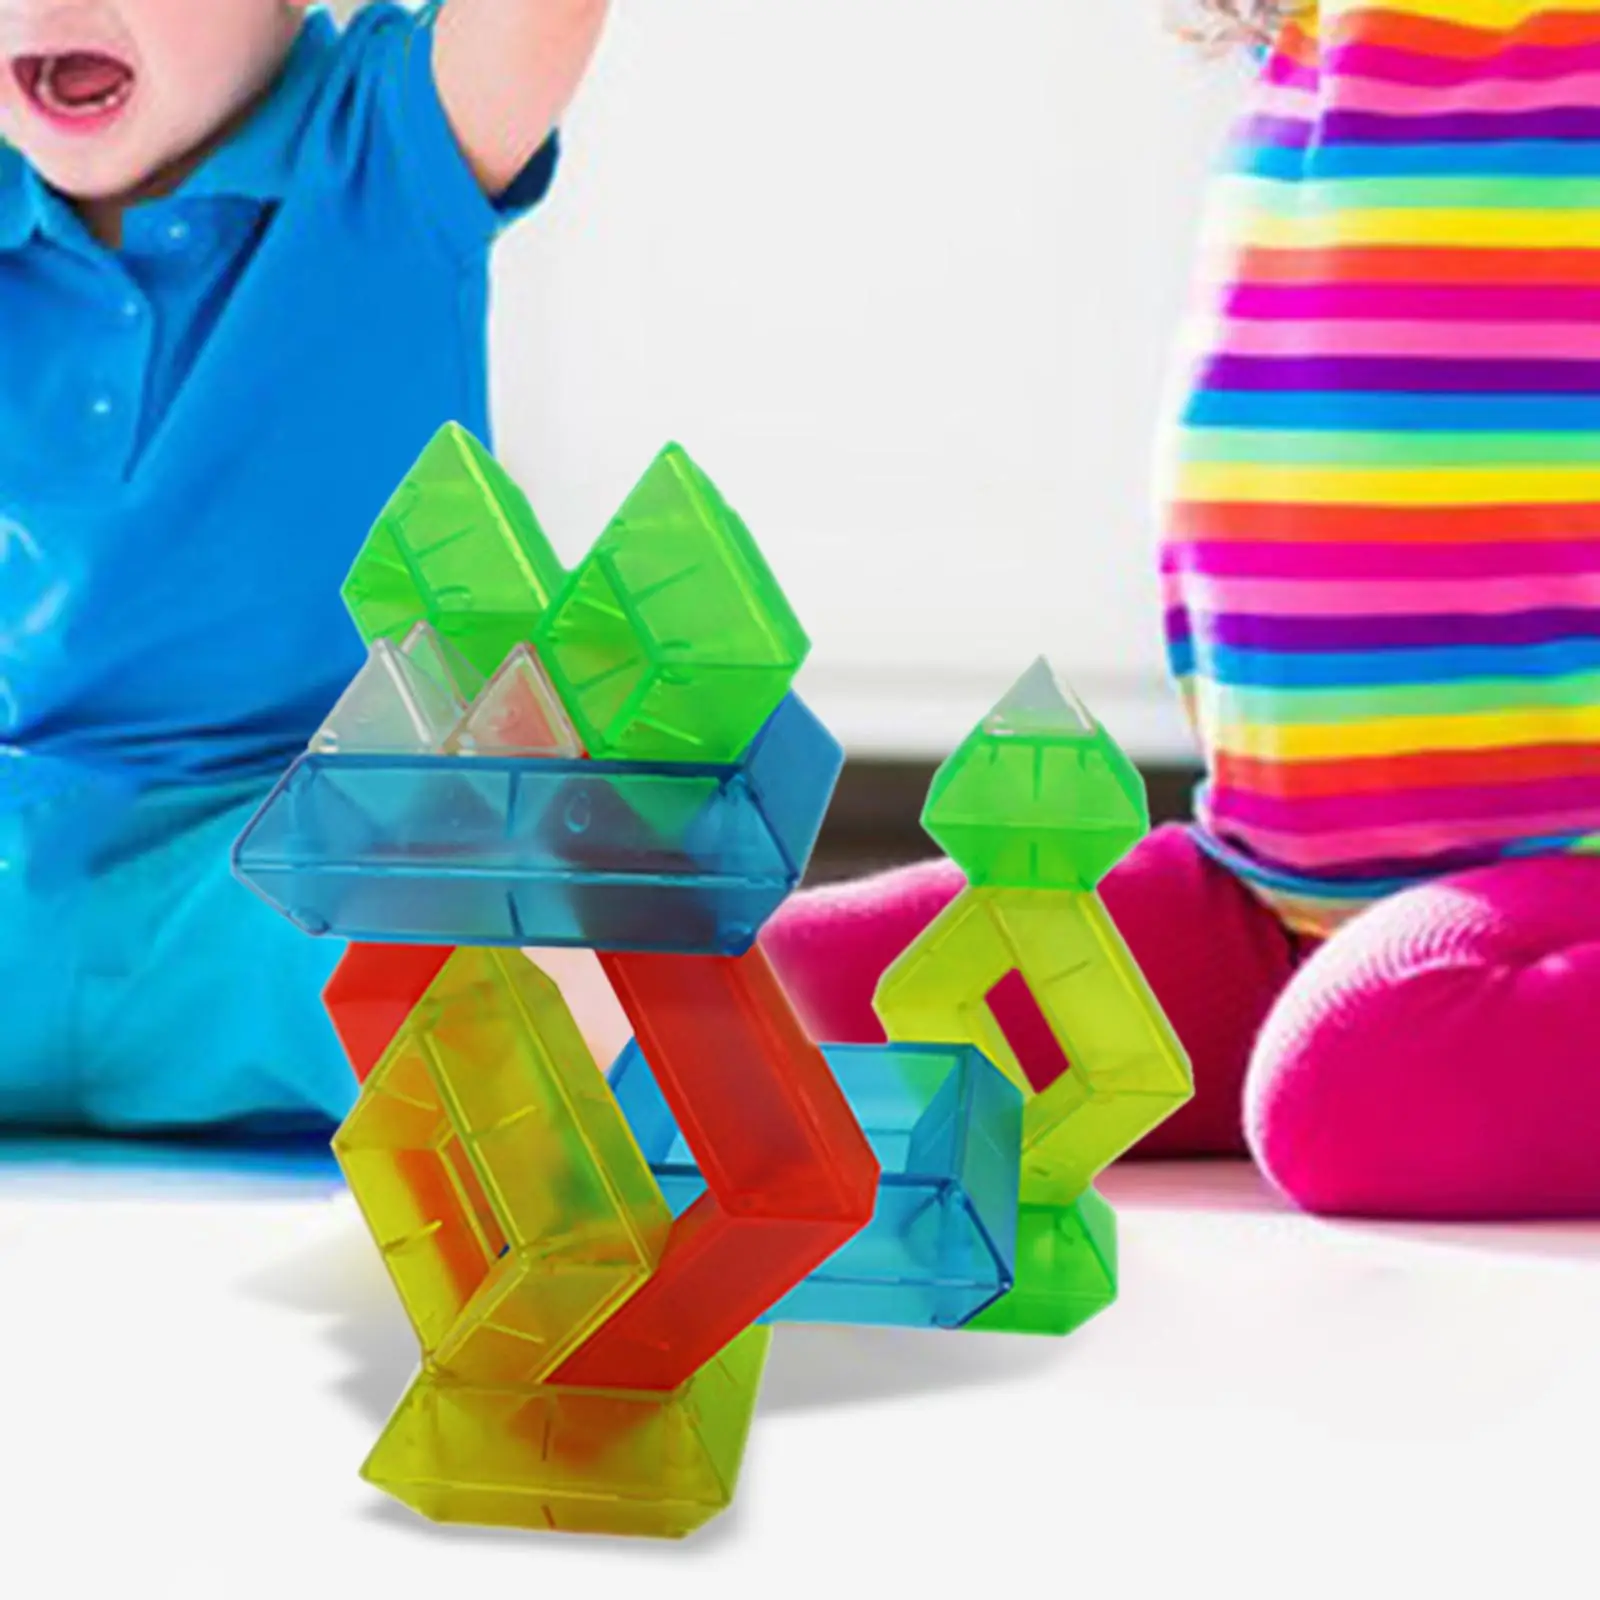 Toys Stacking Creative Ability Colorful Thinking Building for Children